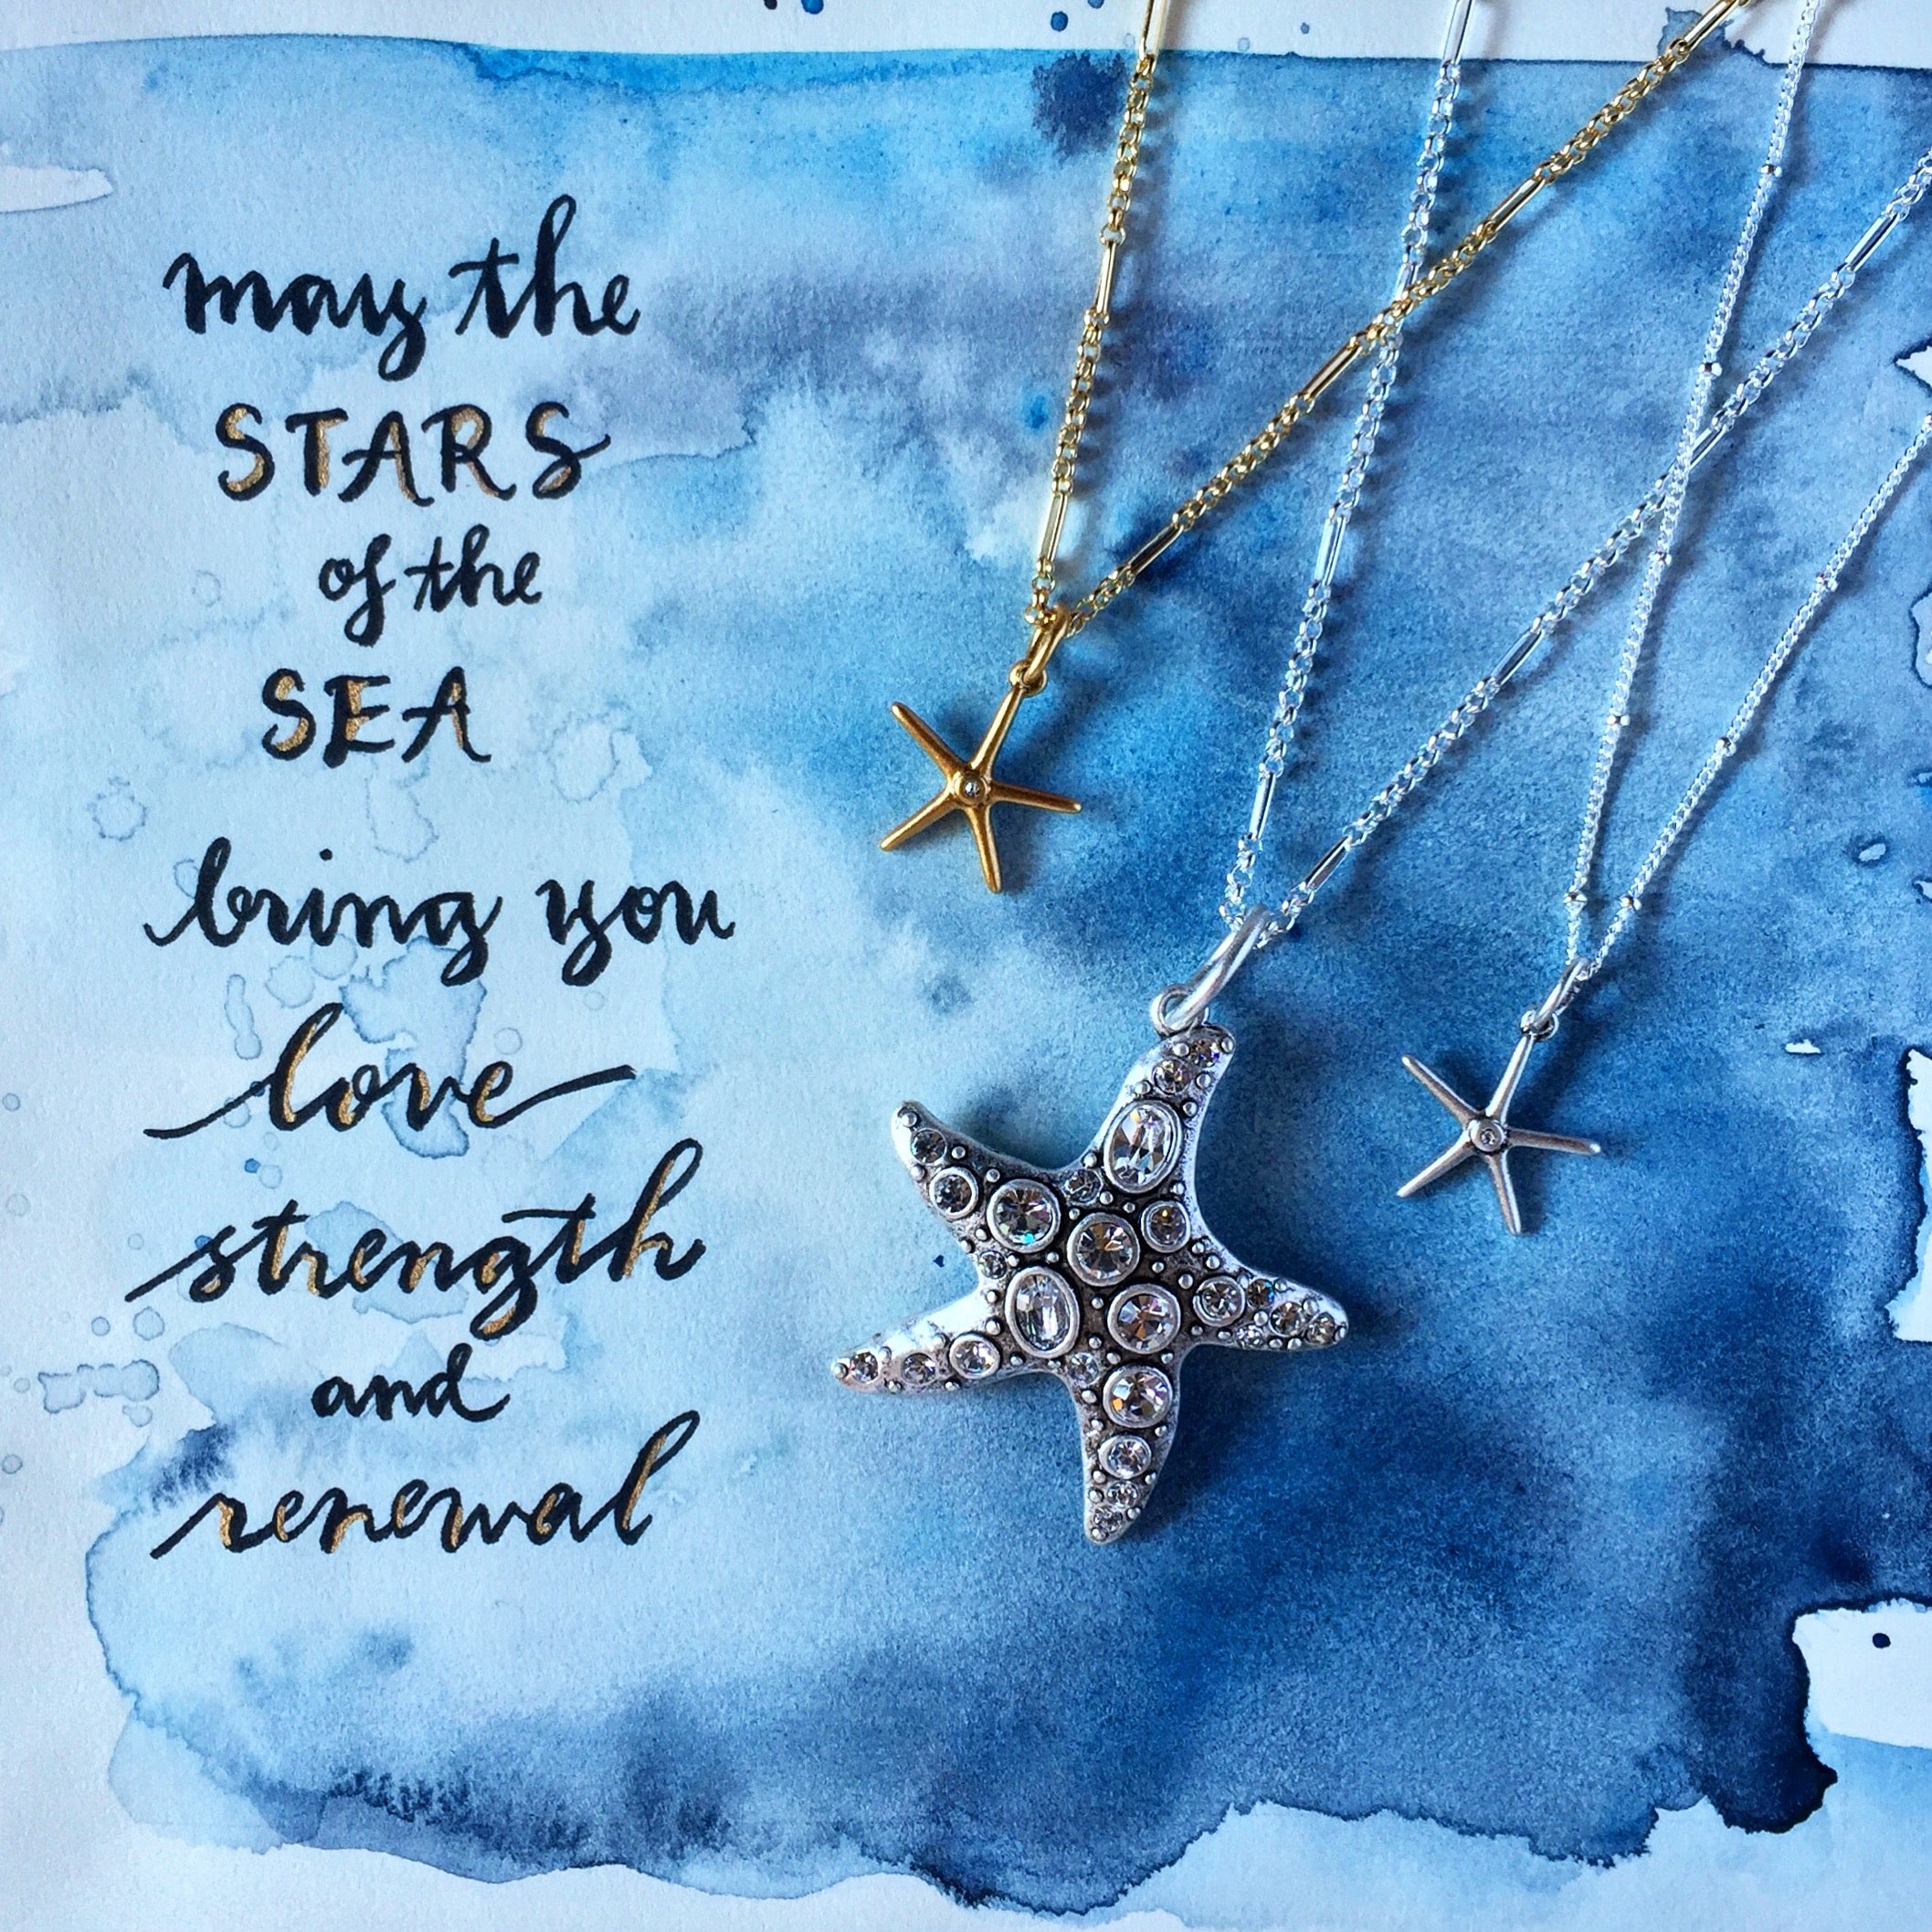 #SequinSayings - Stars of the Sea